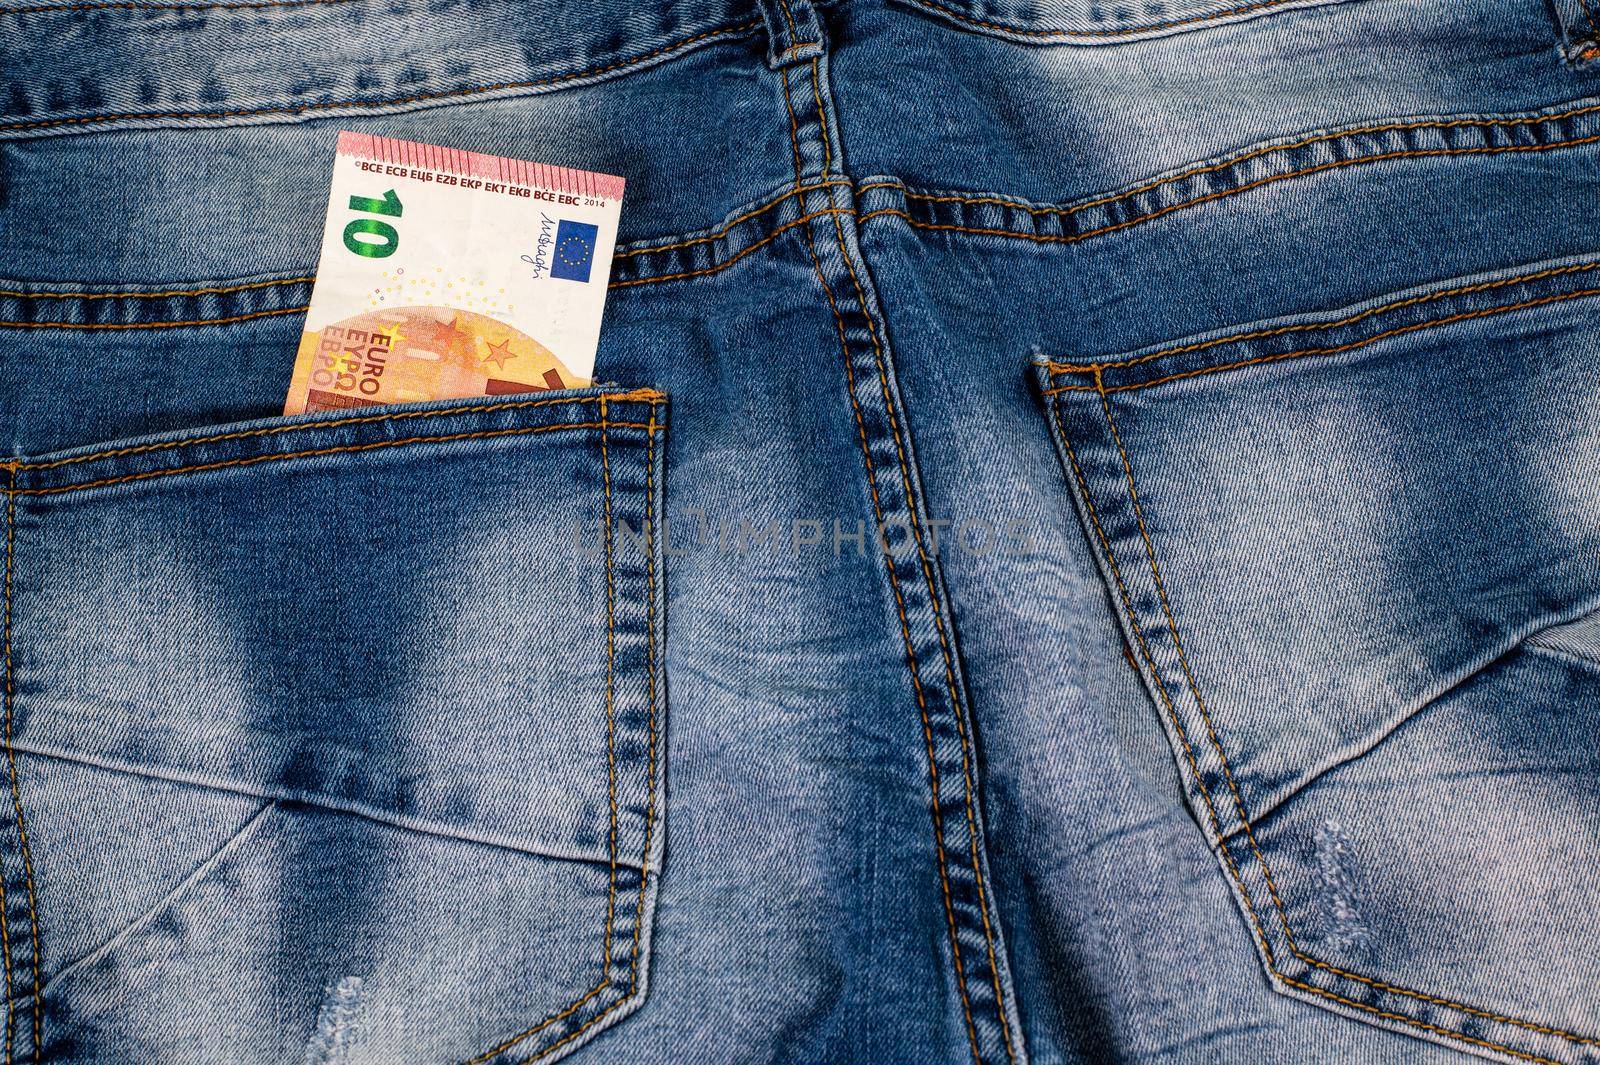 10 euros that come out of the pocket of blue jeans